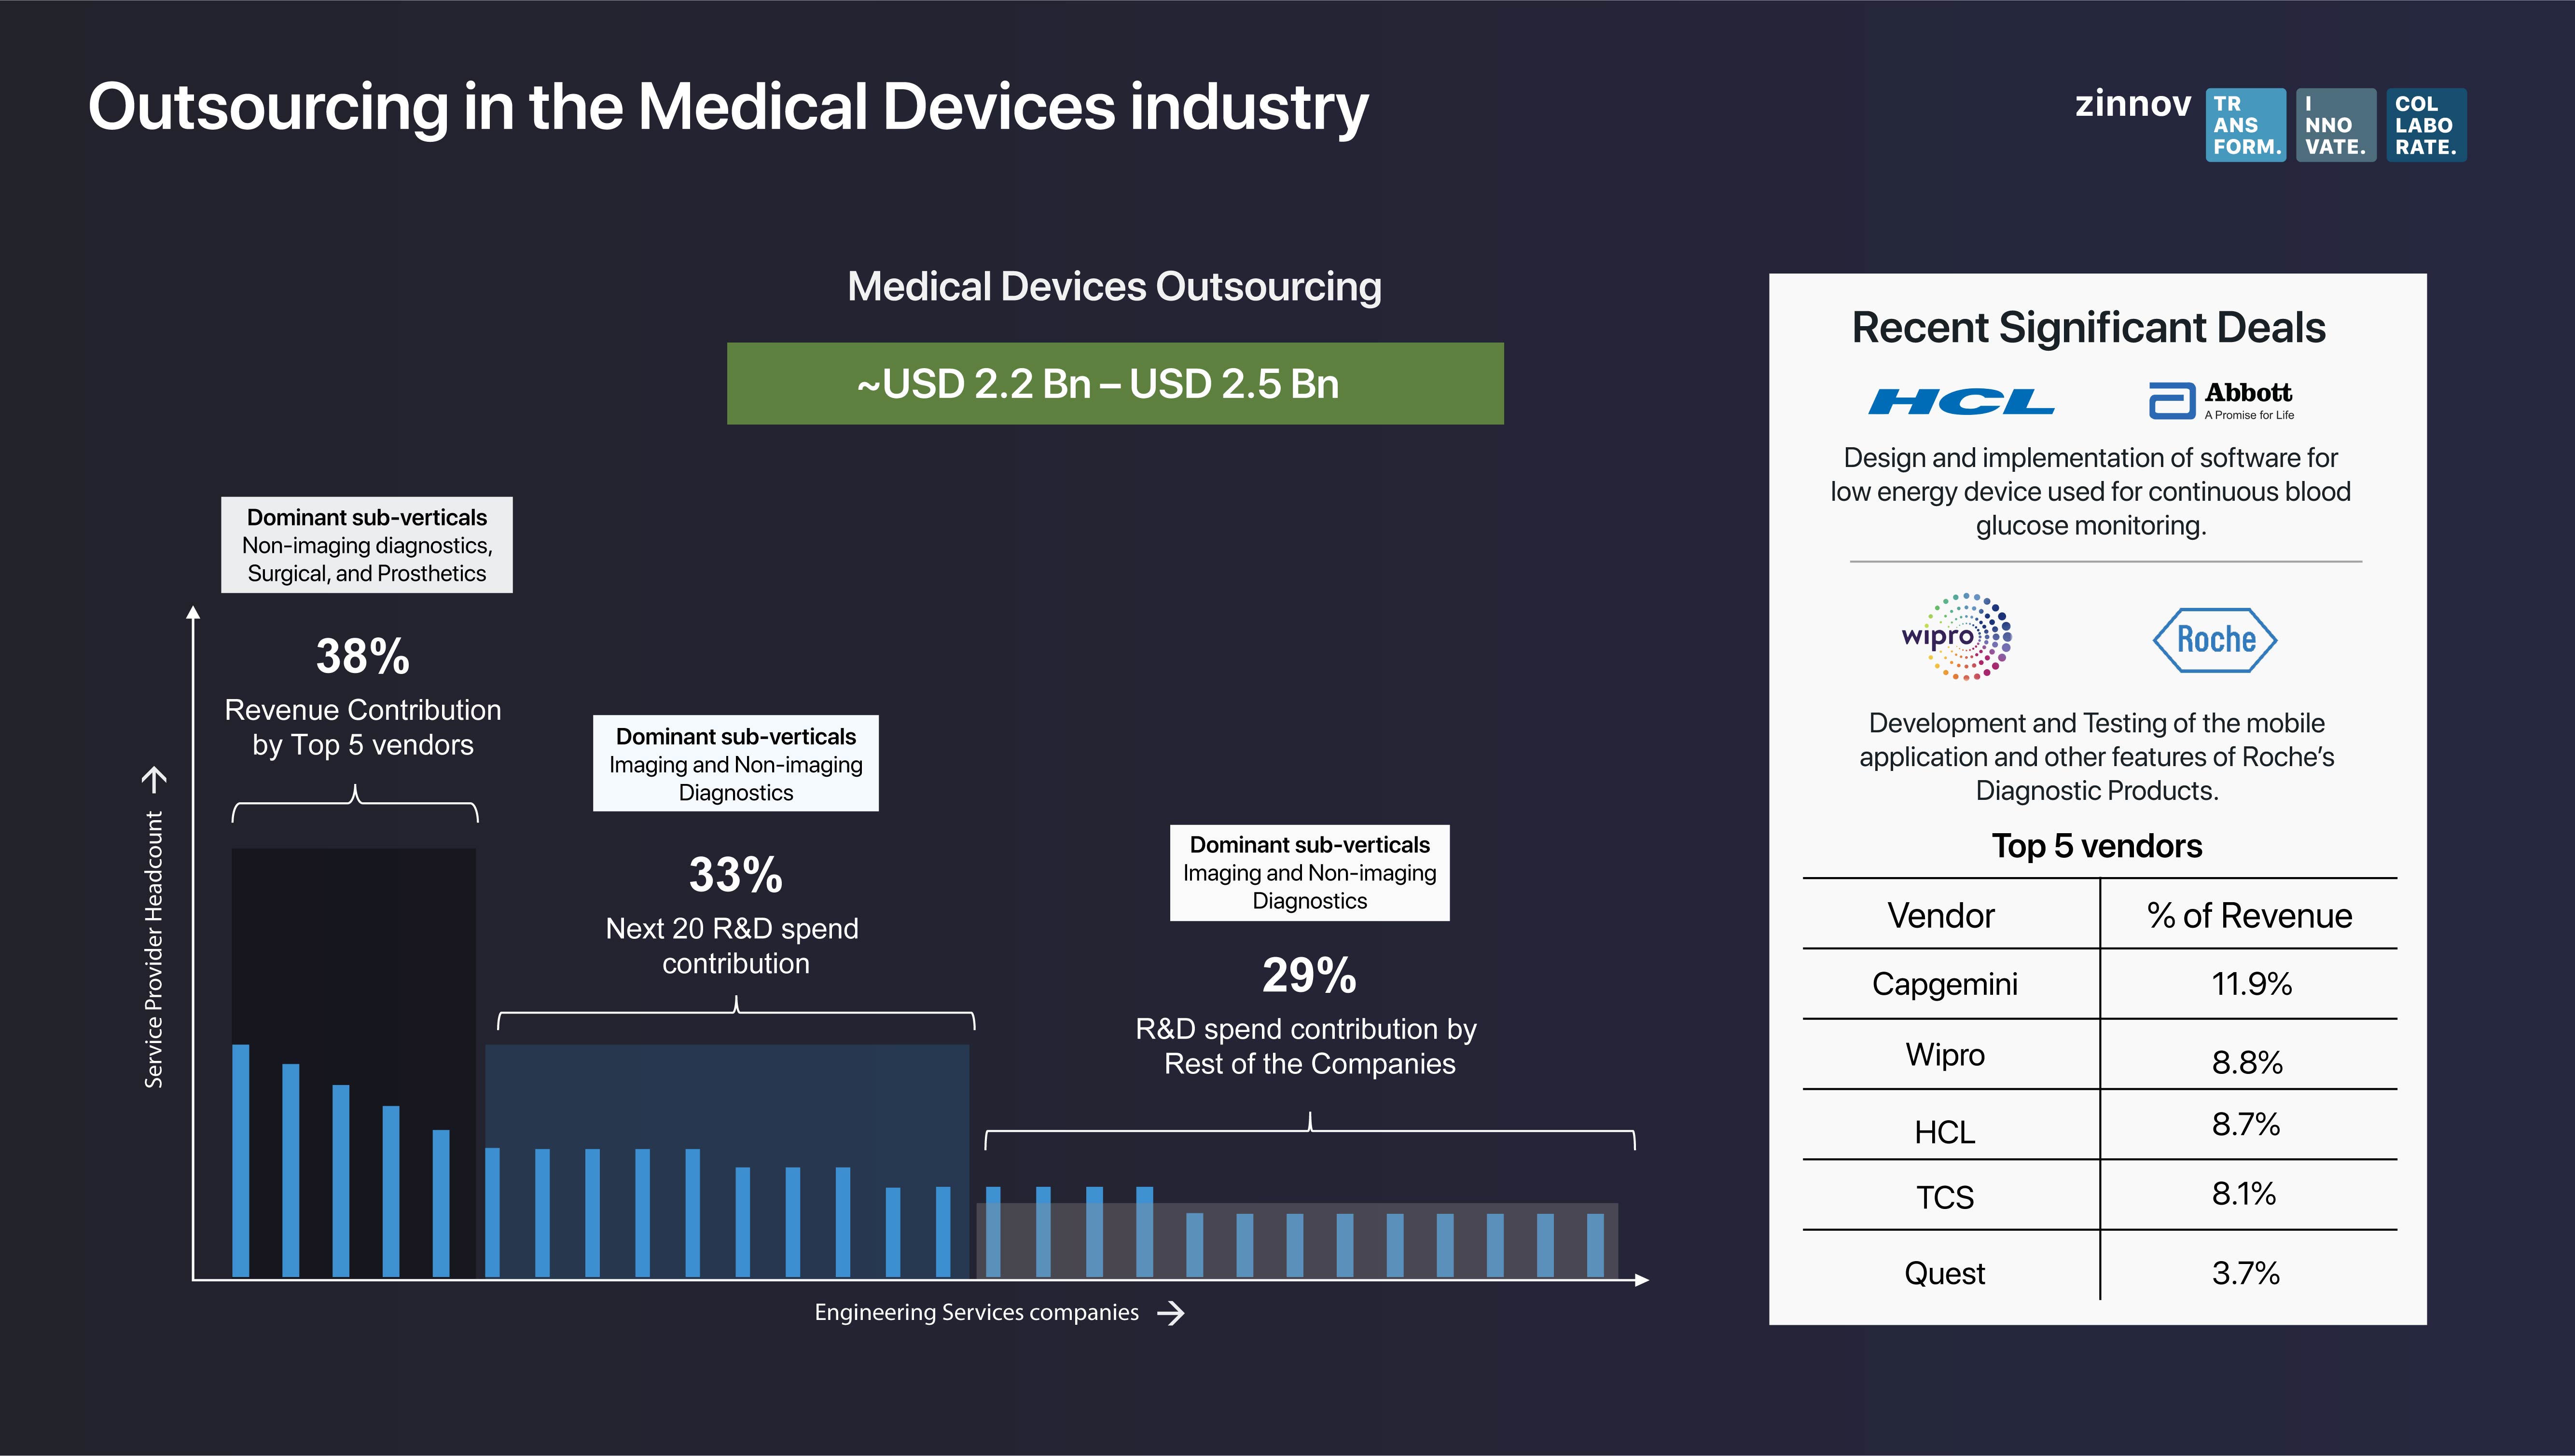 Outsourcing in Medical Devices industry